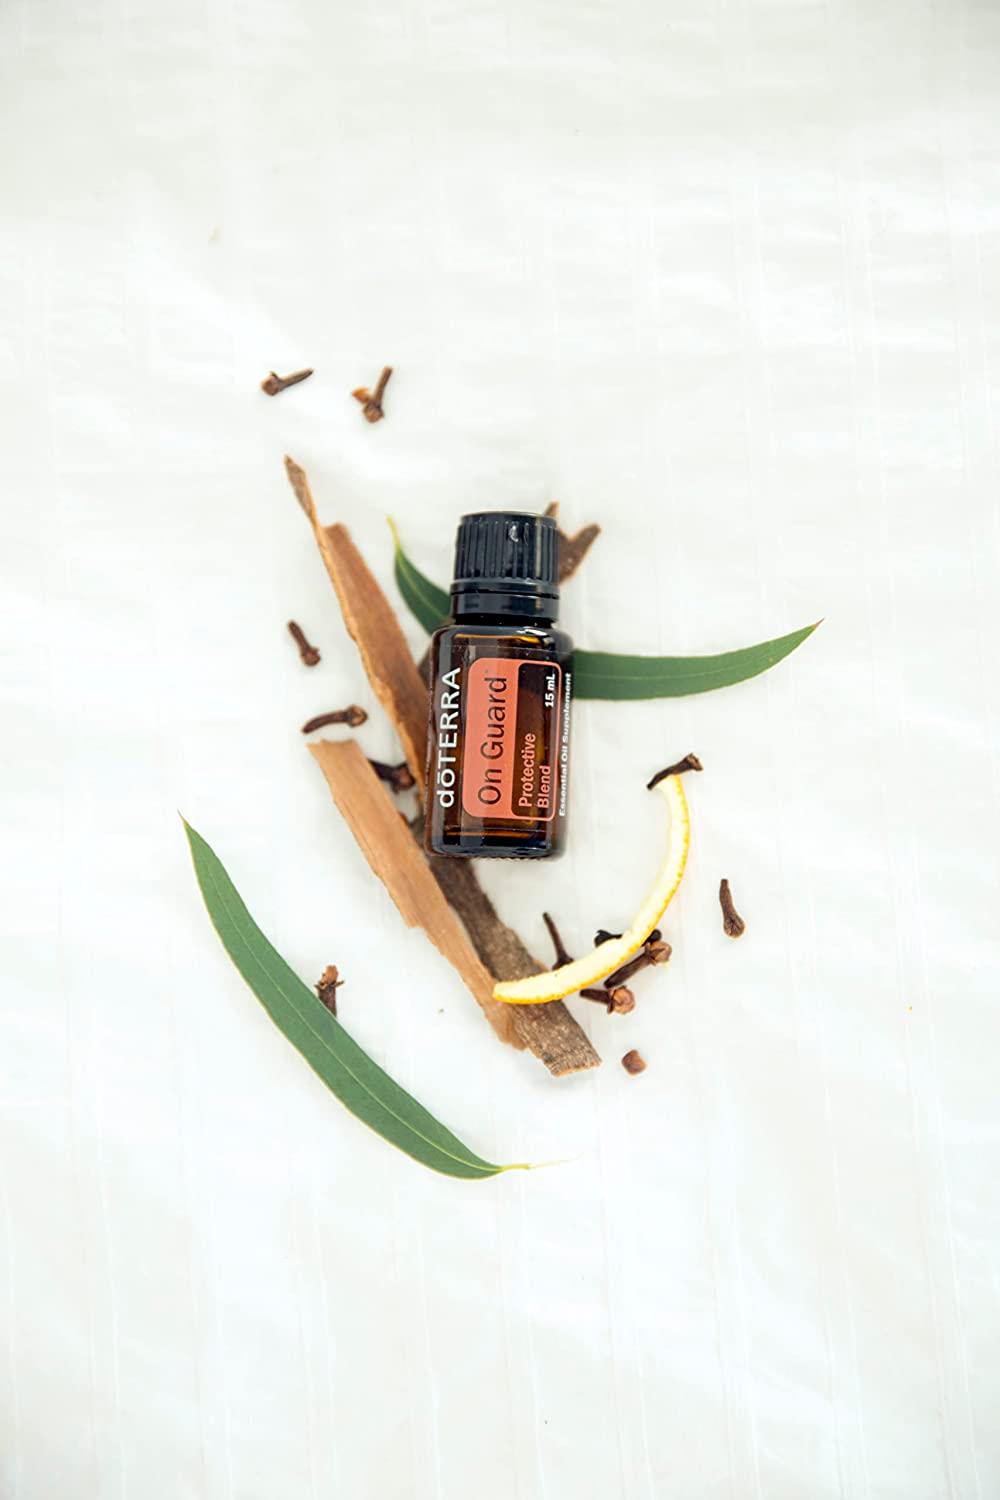 doTERRA - On Guard Essential Oil Protective Blend  